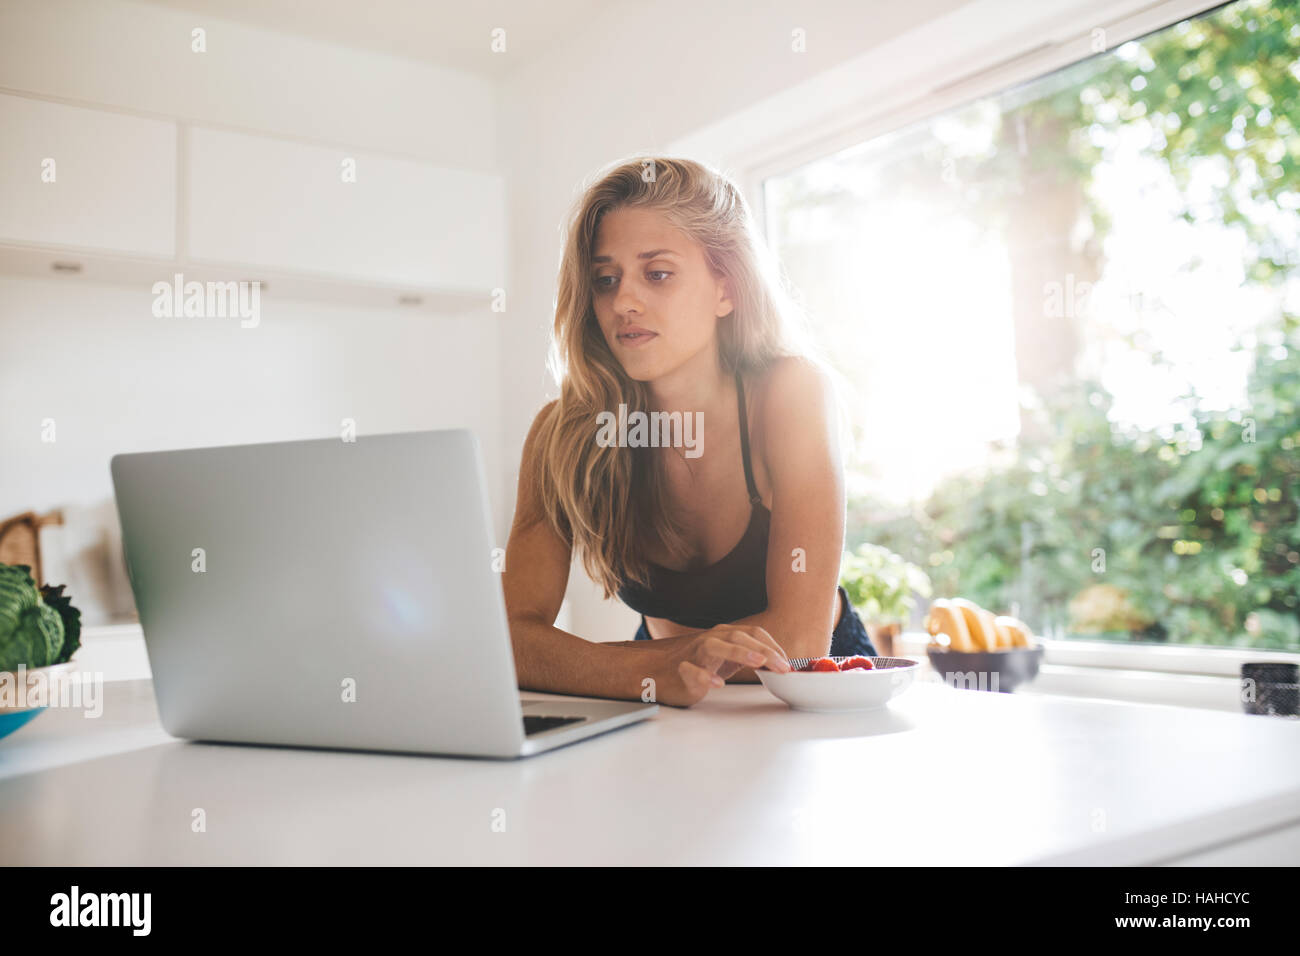 Young woman leaning on kitchen counter and looking at laptop. Beautiful female eating berries and using laptop. Stock Photo